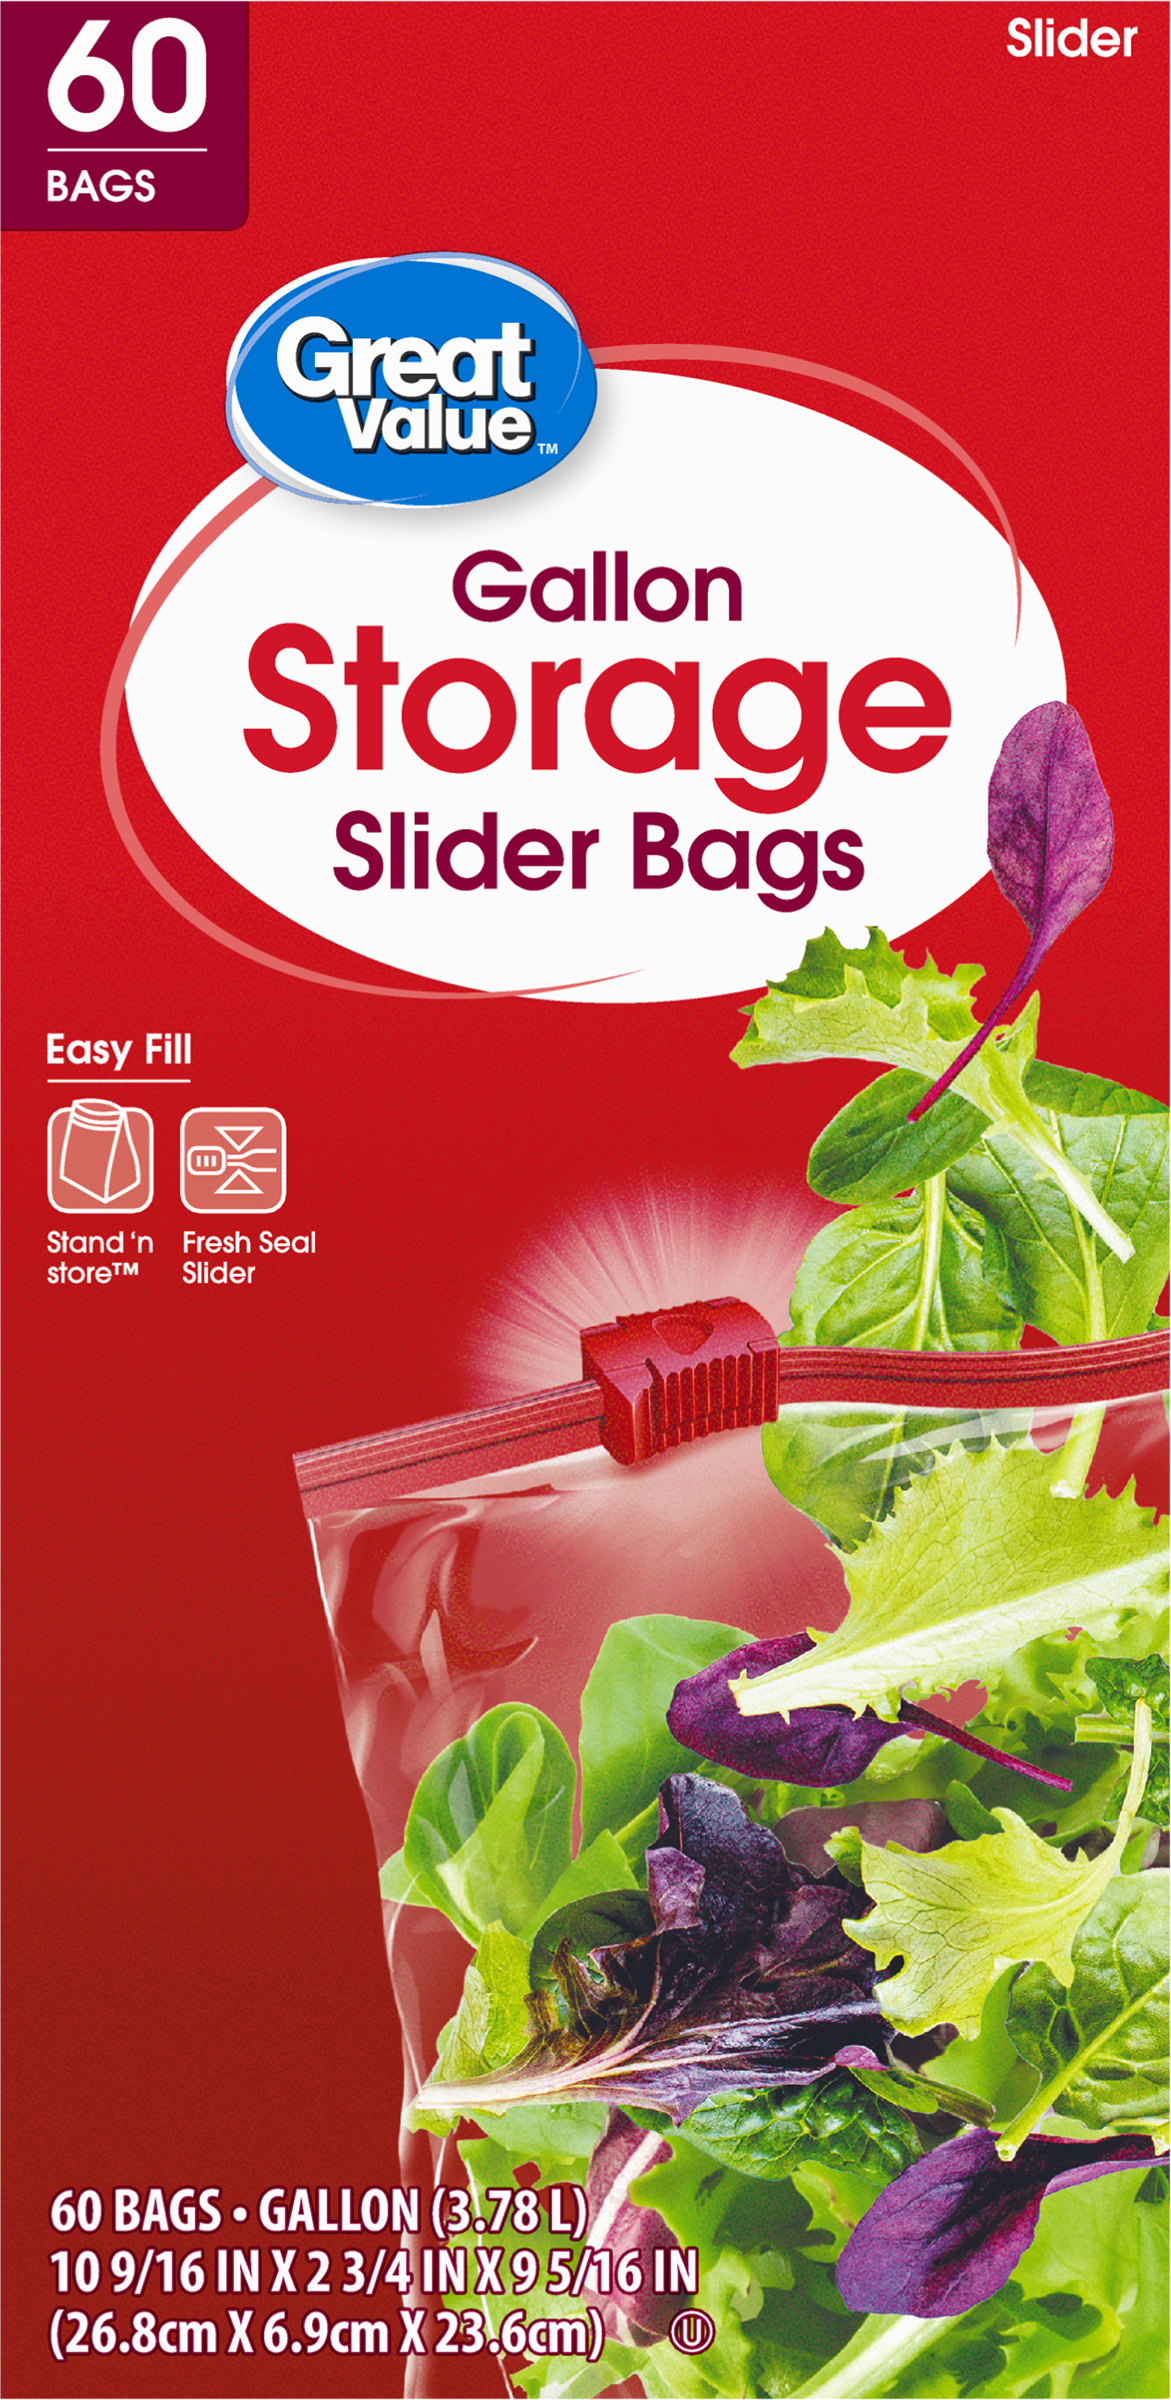 Great Value Fresh Seal Slider Zipper Bags, Gallon Storage, 60 Count - image 1 of 8